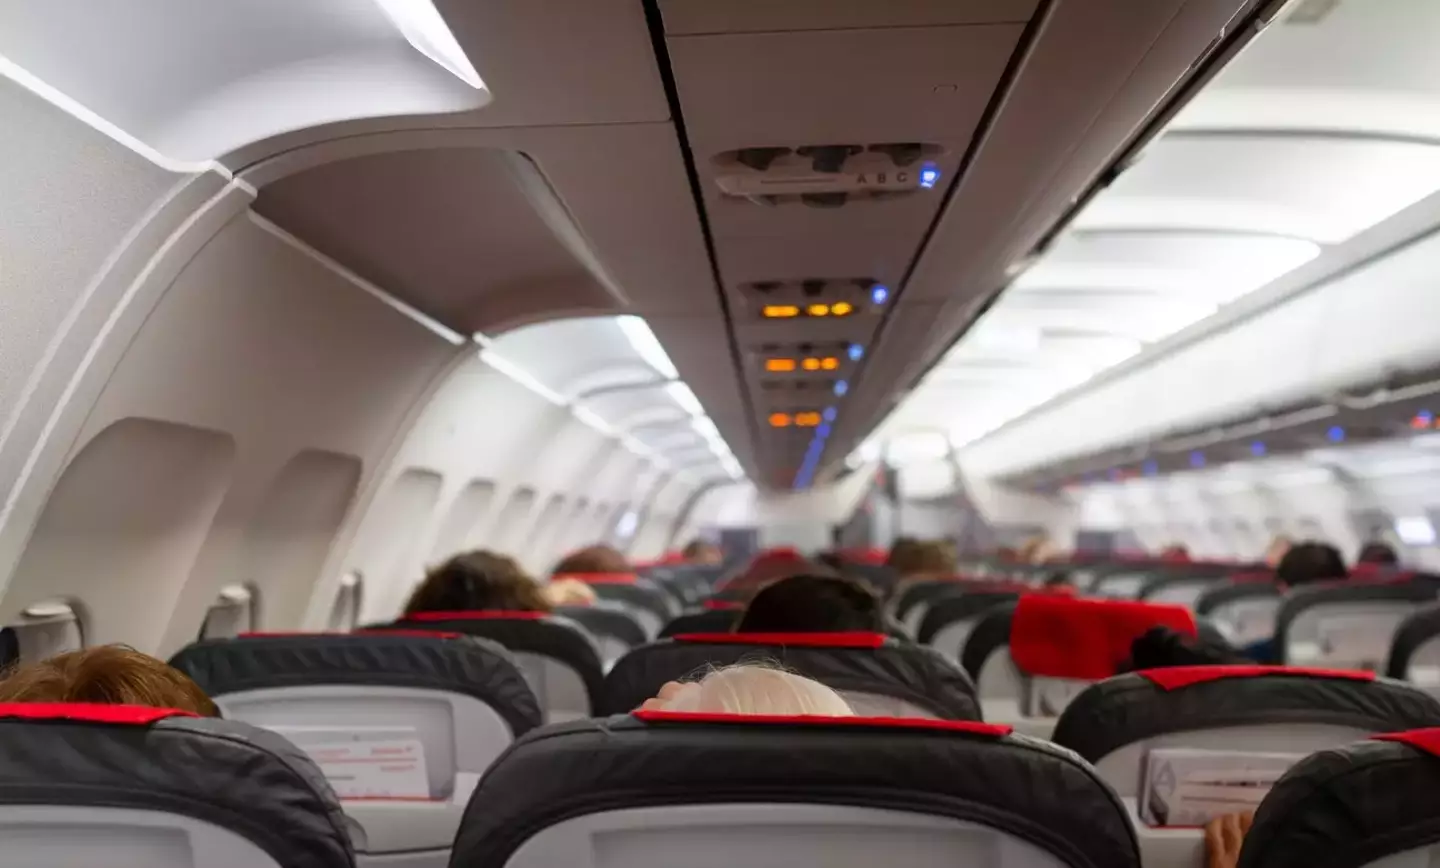 The video sparked a fiery debate over plane etiquette.